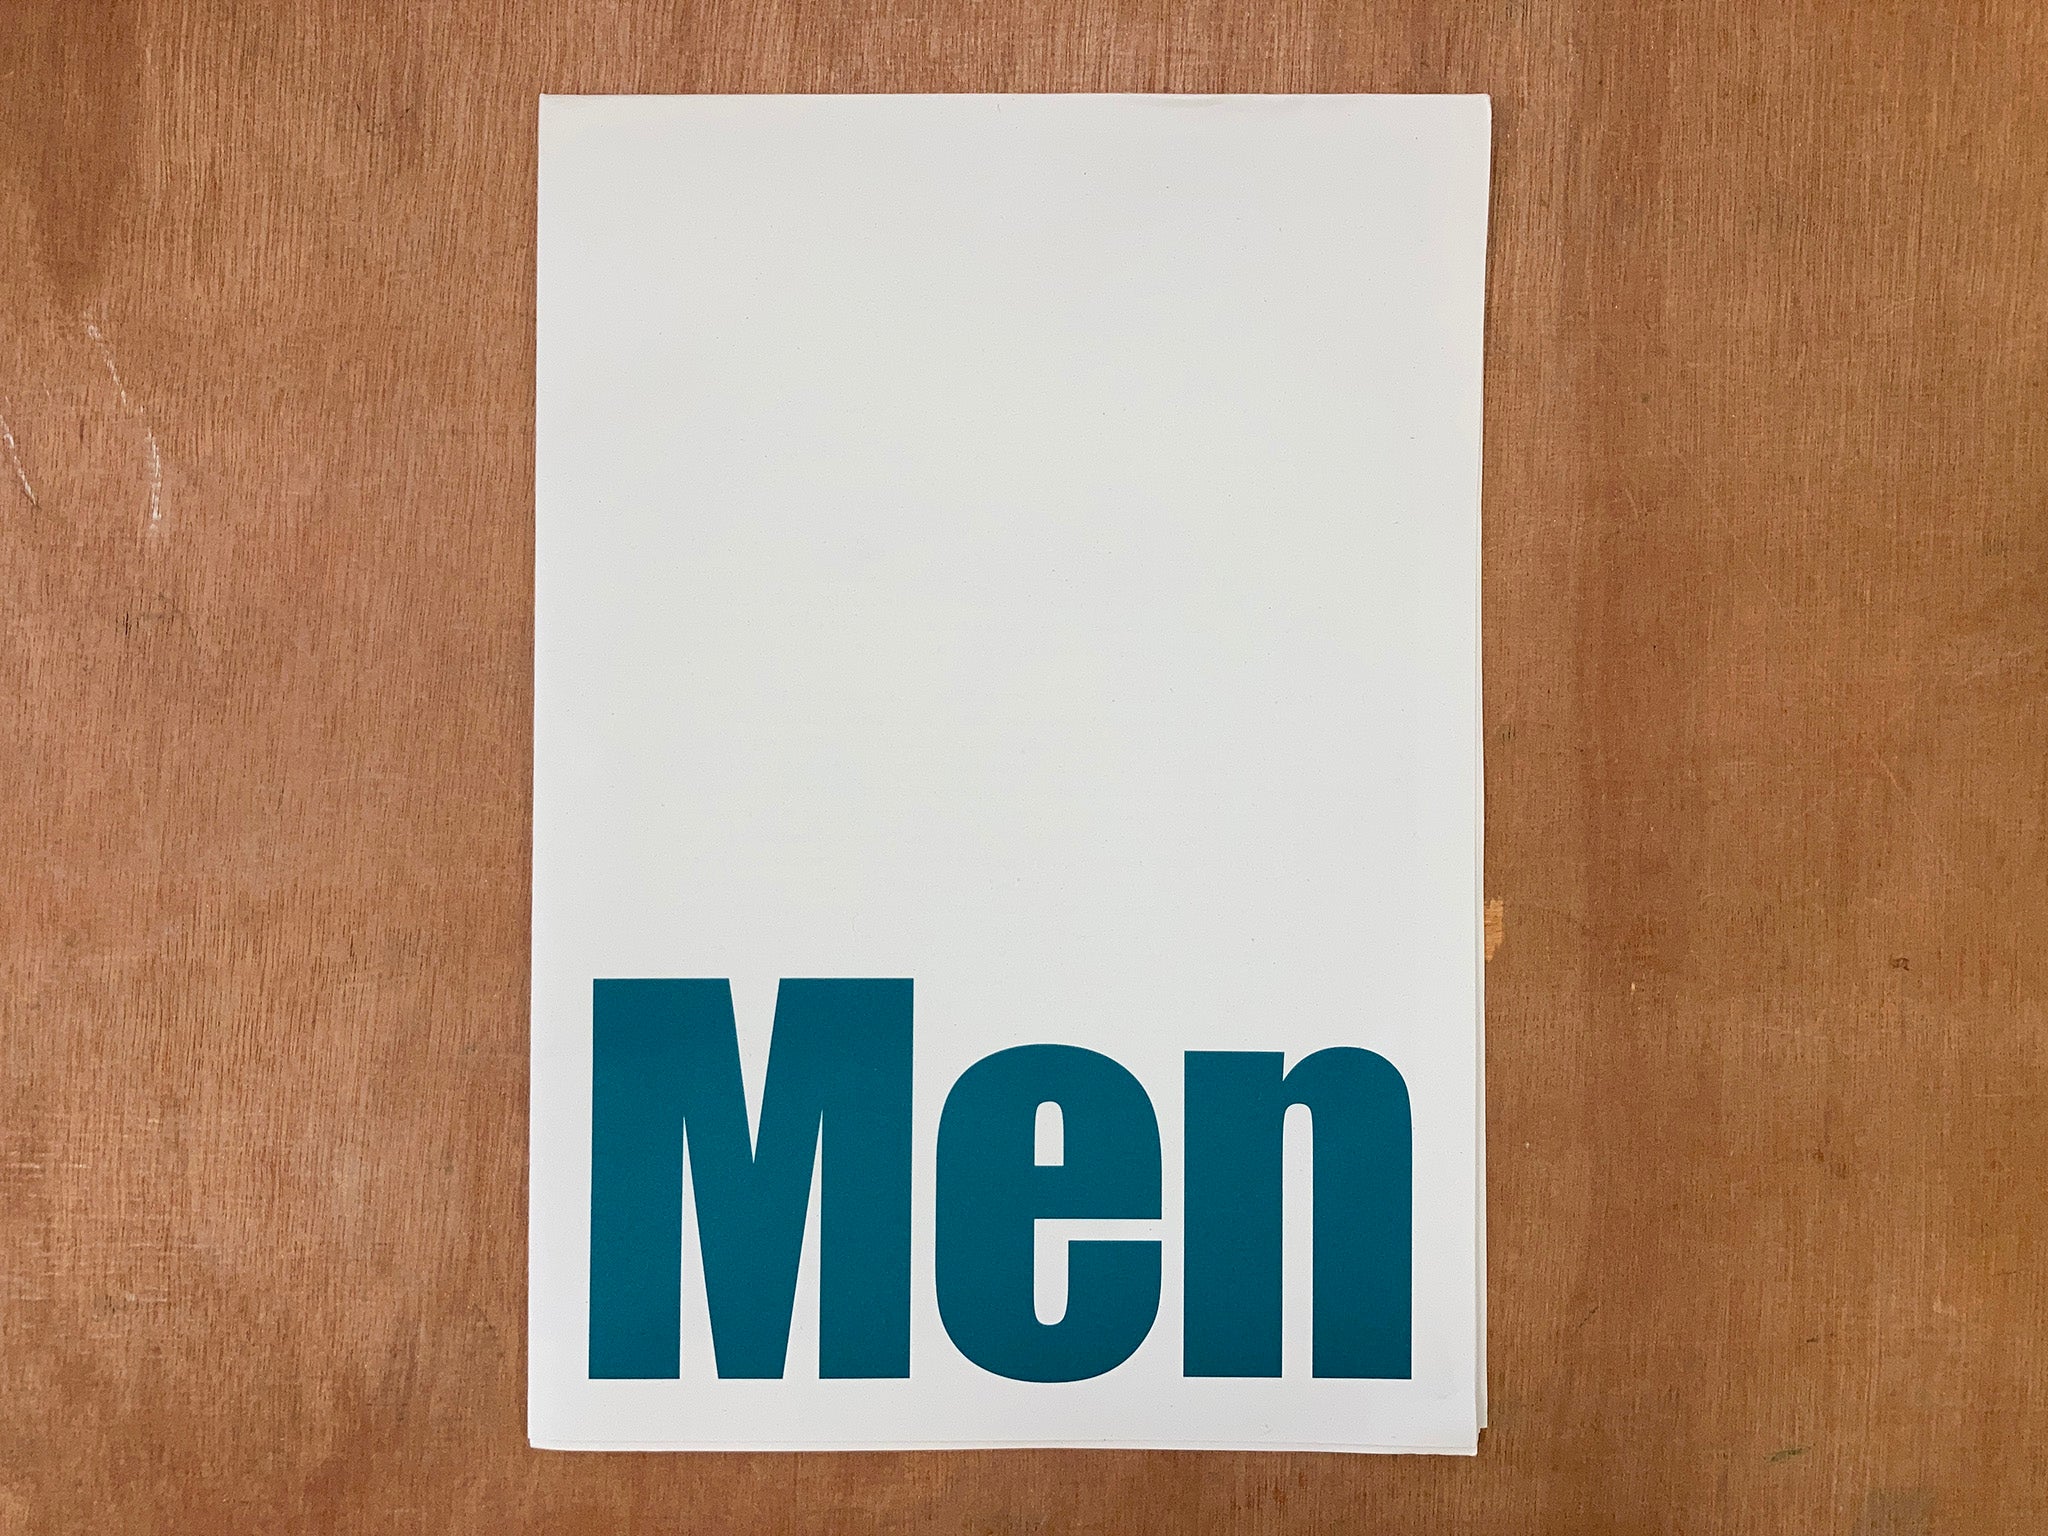 ALSO MEN by James William Murray